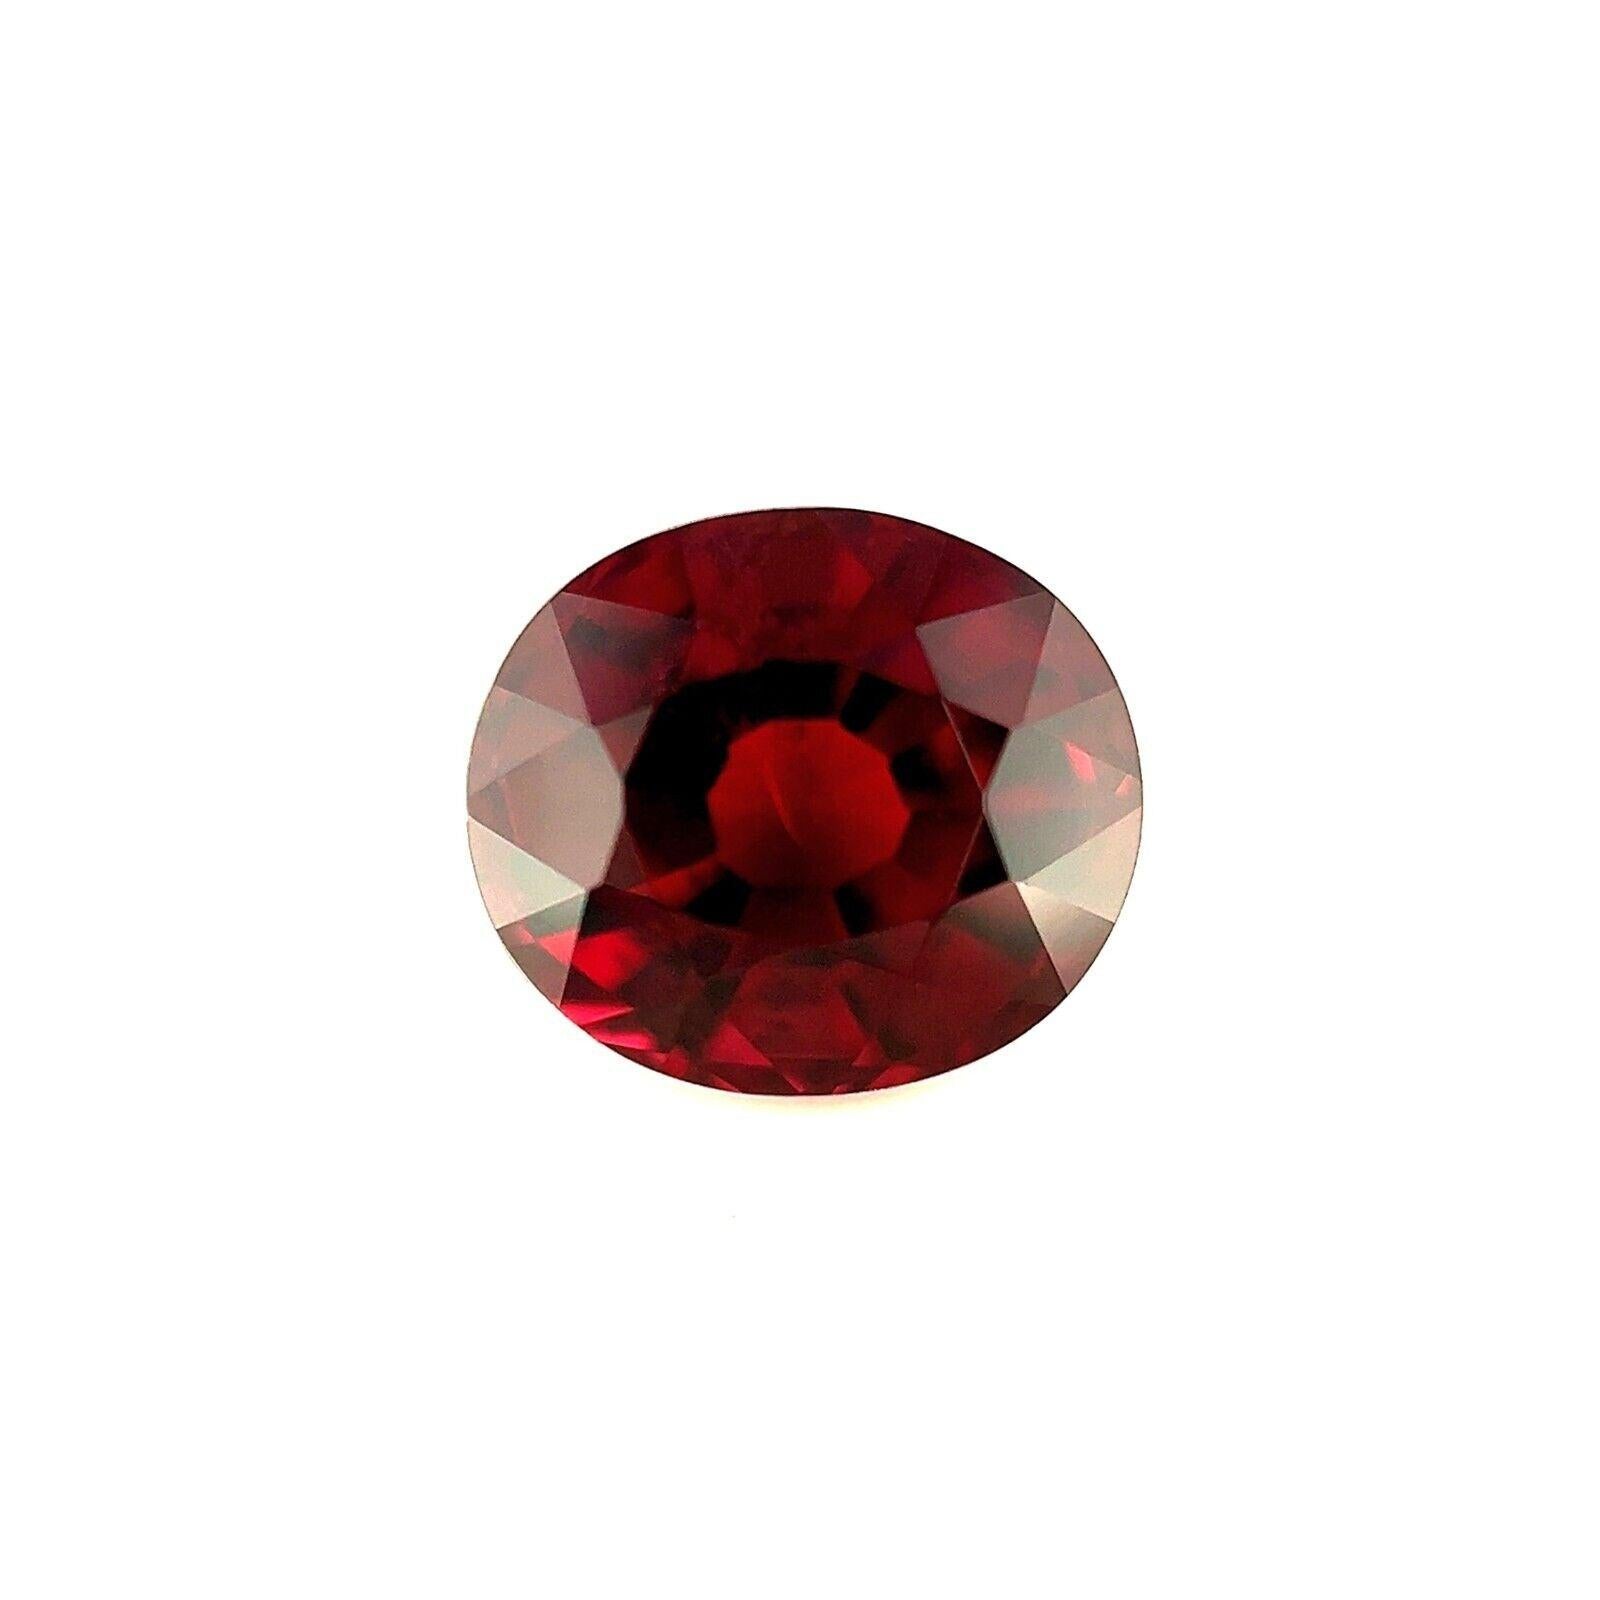 3.26ct Deep Purple Red Rhodolite Garnet Oval Cut 8.4x7.3mm Loose Gemstone

Fine Large Natural Deep Purple Red Rhodolite Garnet Gem.
3.26 Carat with a beautiful vivid purple red colour and excellent clarity, a very clean stone.
Also has an excellent